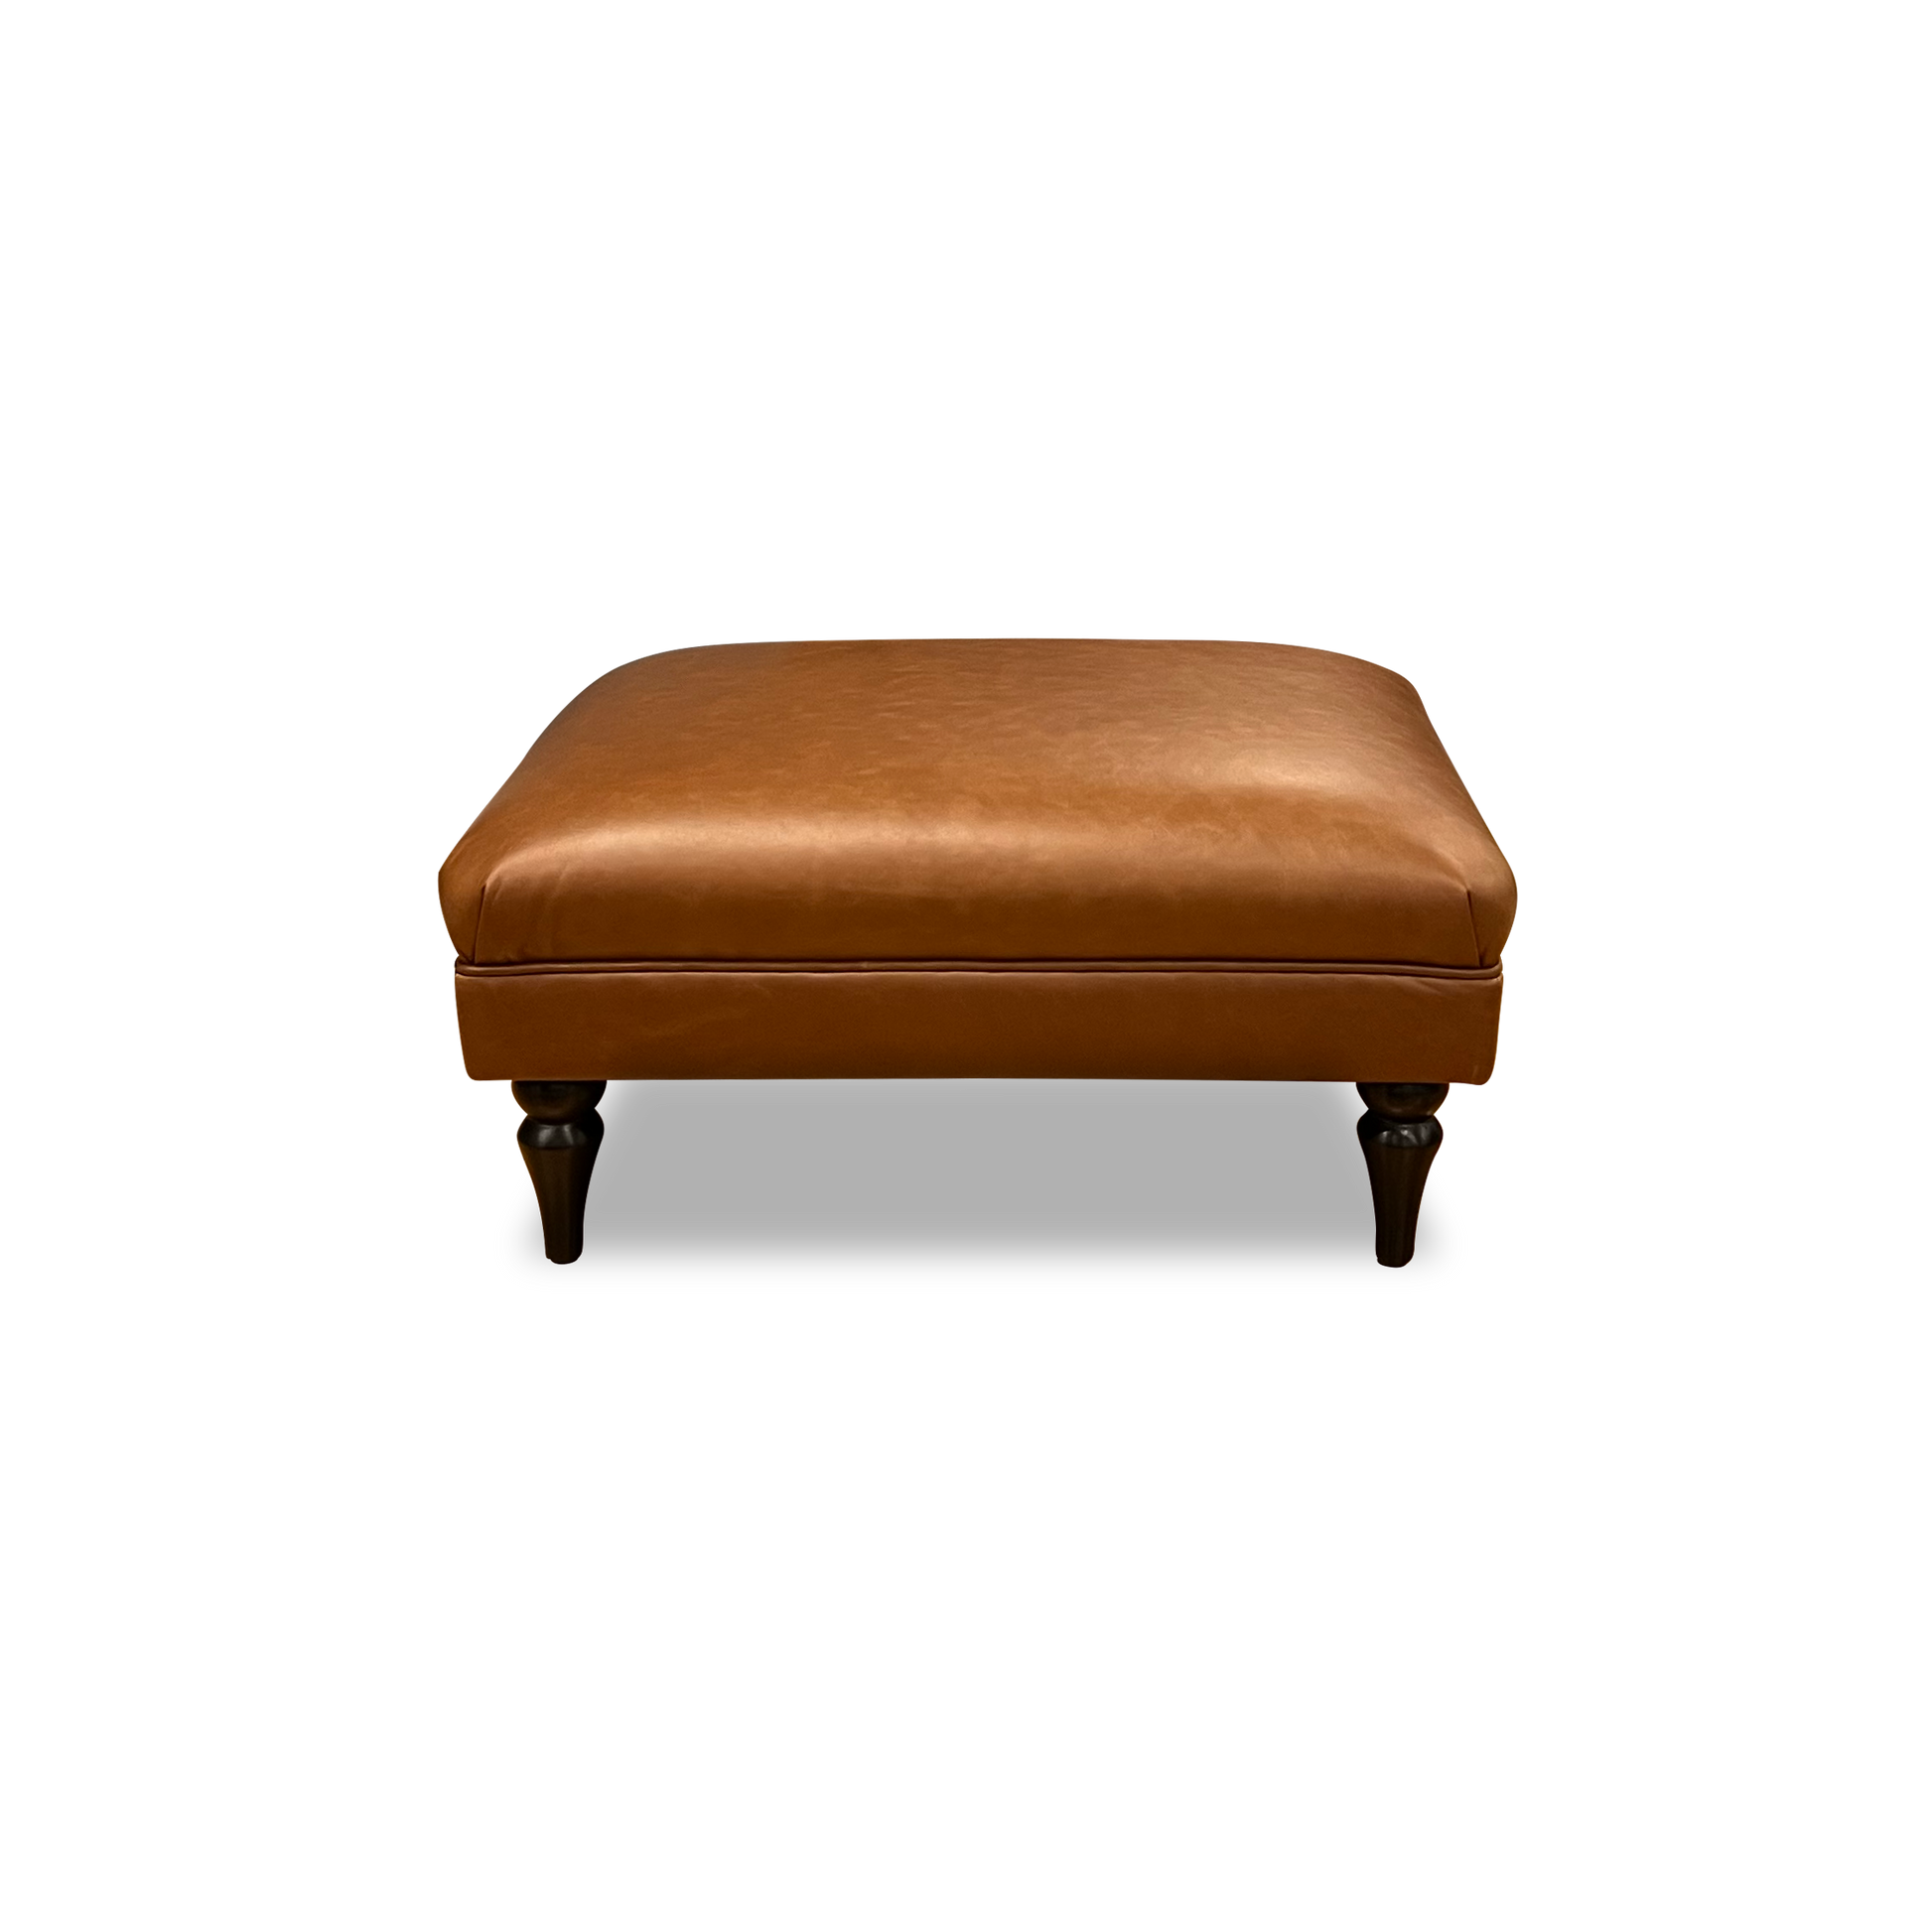 Hadleigh Ottoman by Molmic available from Make Your House A Home, Furniture Store located in Bendigo, Victoria. Australian Made in Melbourne.